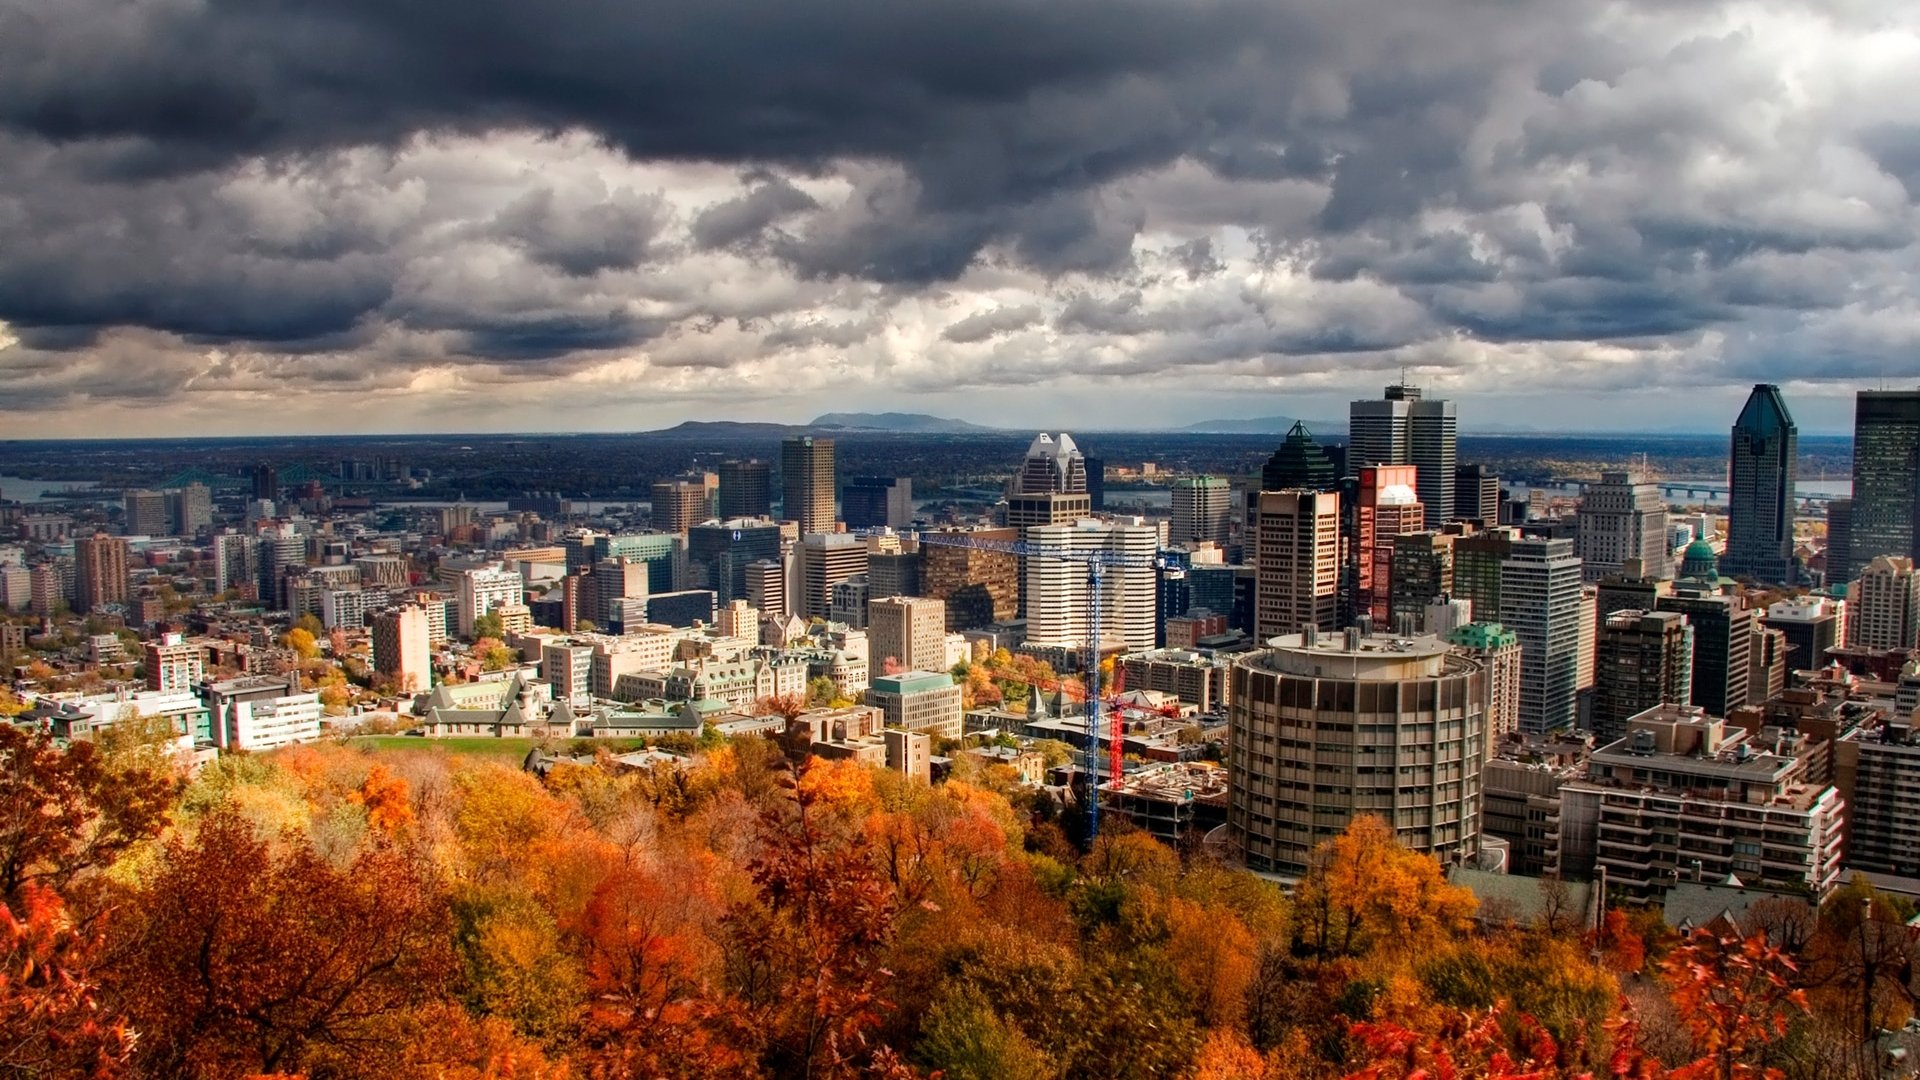  Montreal  HD Wallpaper  Background Image 1920x1080 ID 